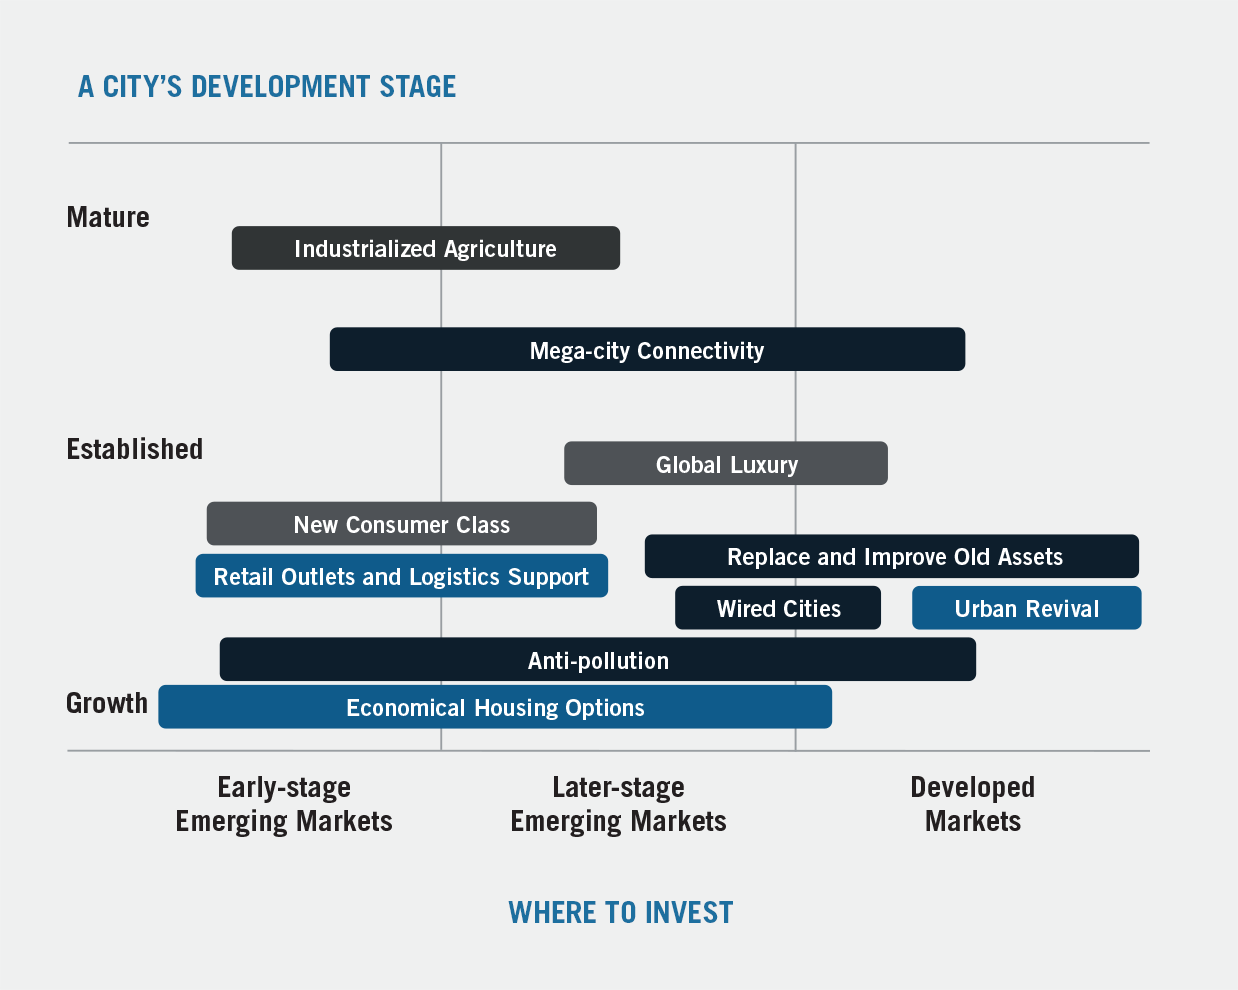 A City's Development Stage, Where to Invest